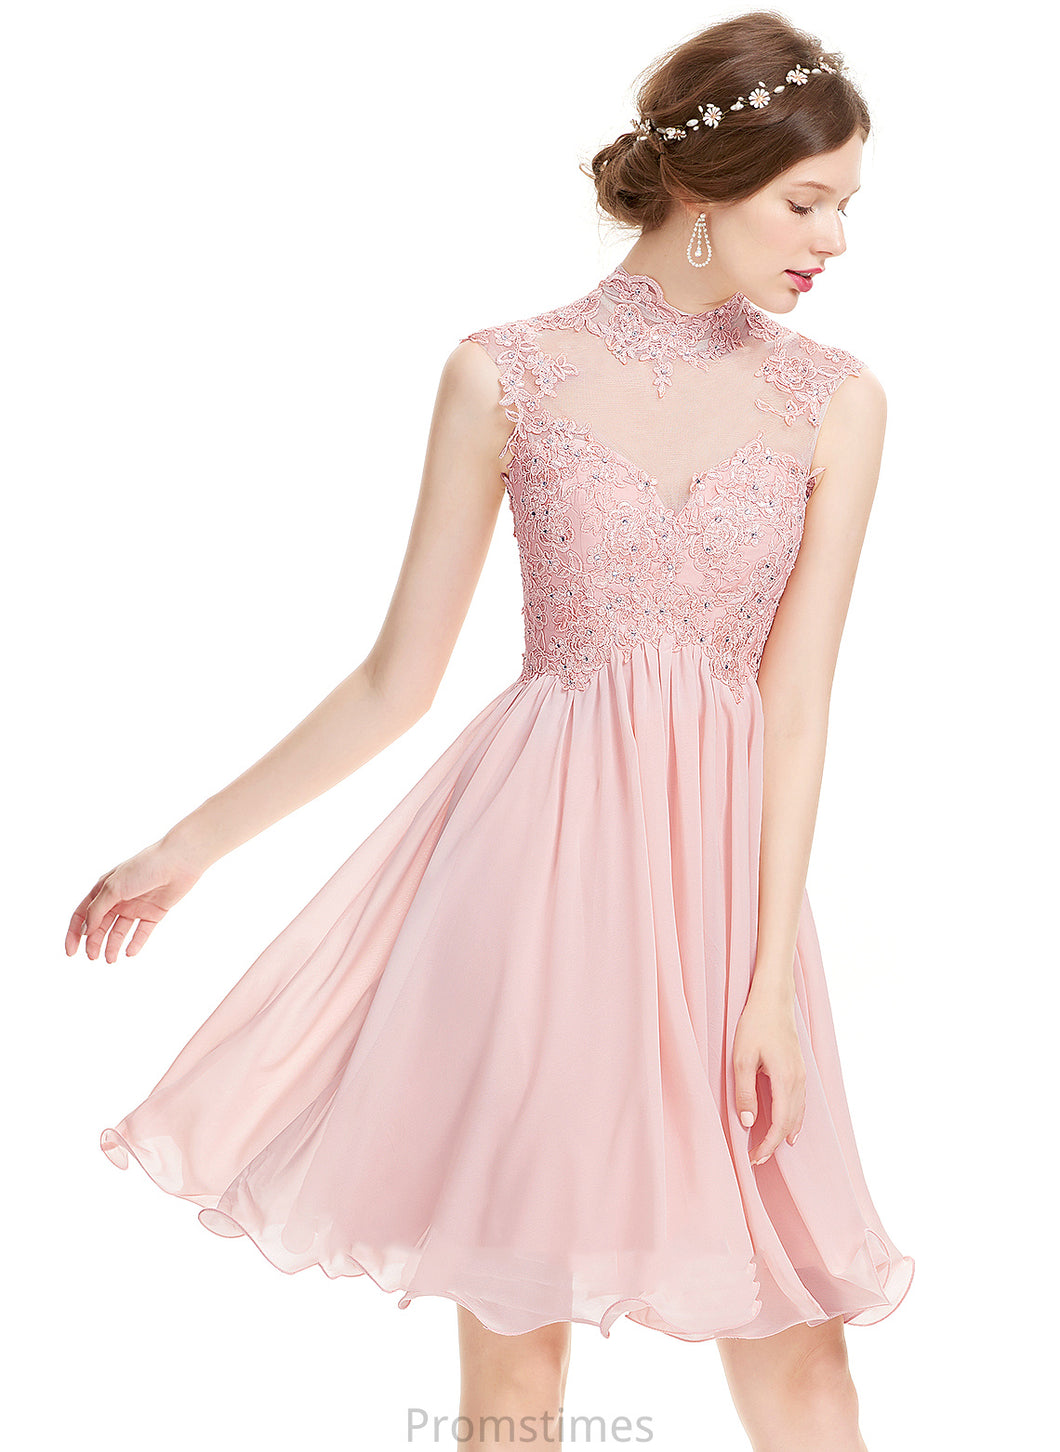 Neck Chiffon Lace Homecoming Dresses A-Line Homecoming Knee-Length With High Beading Dress Abril